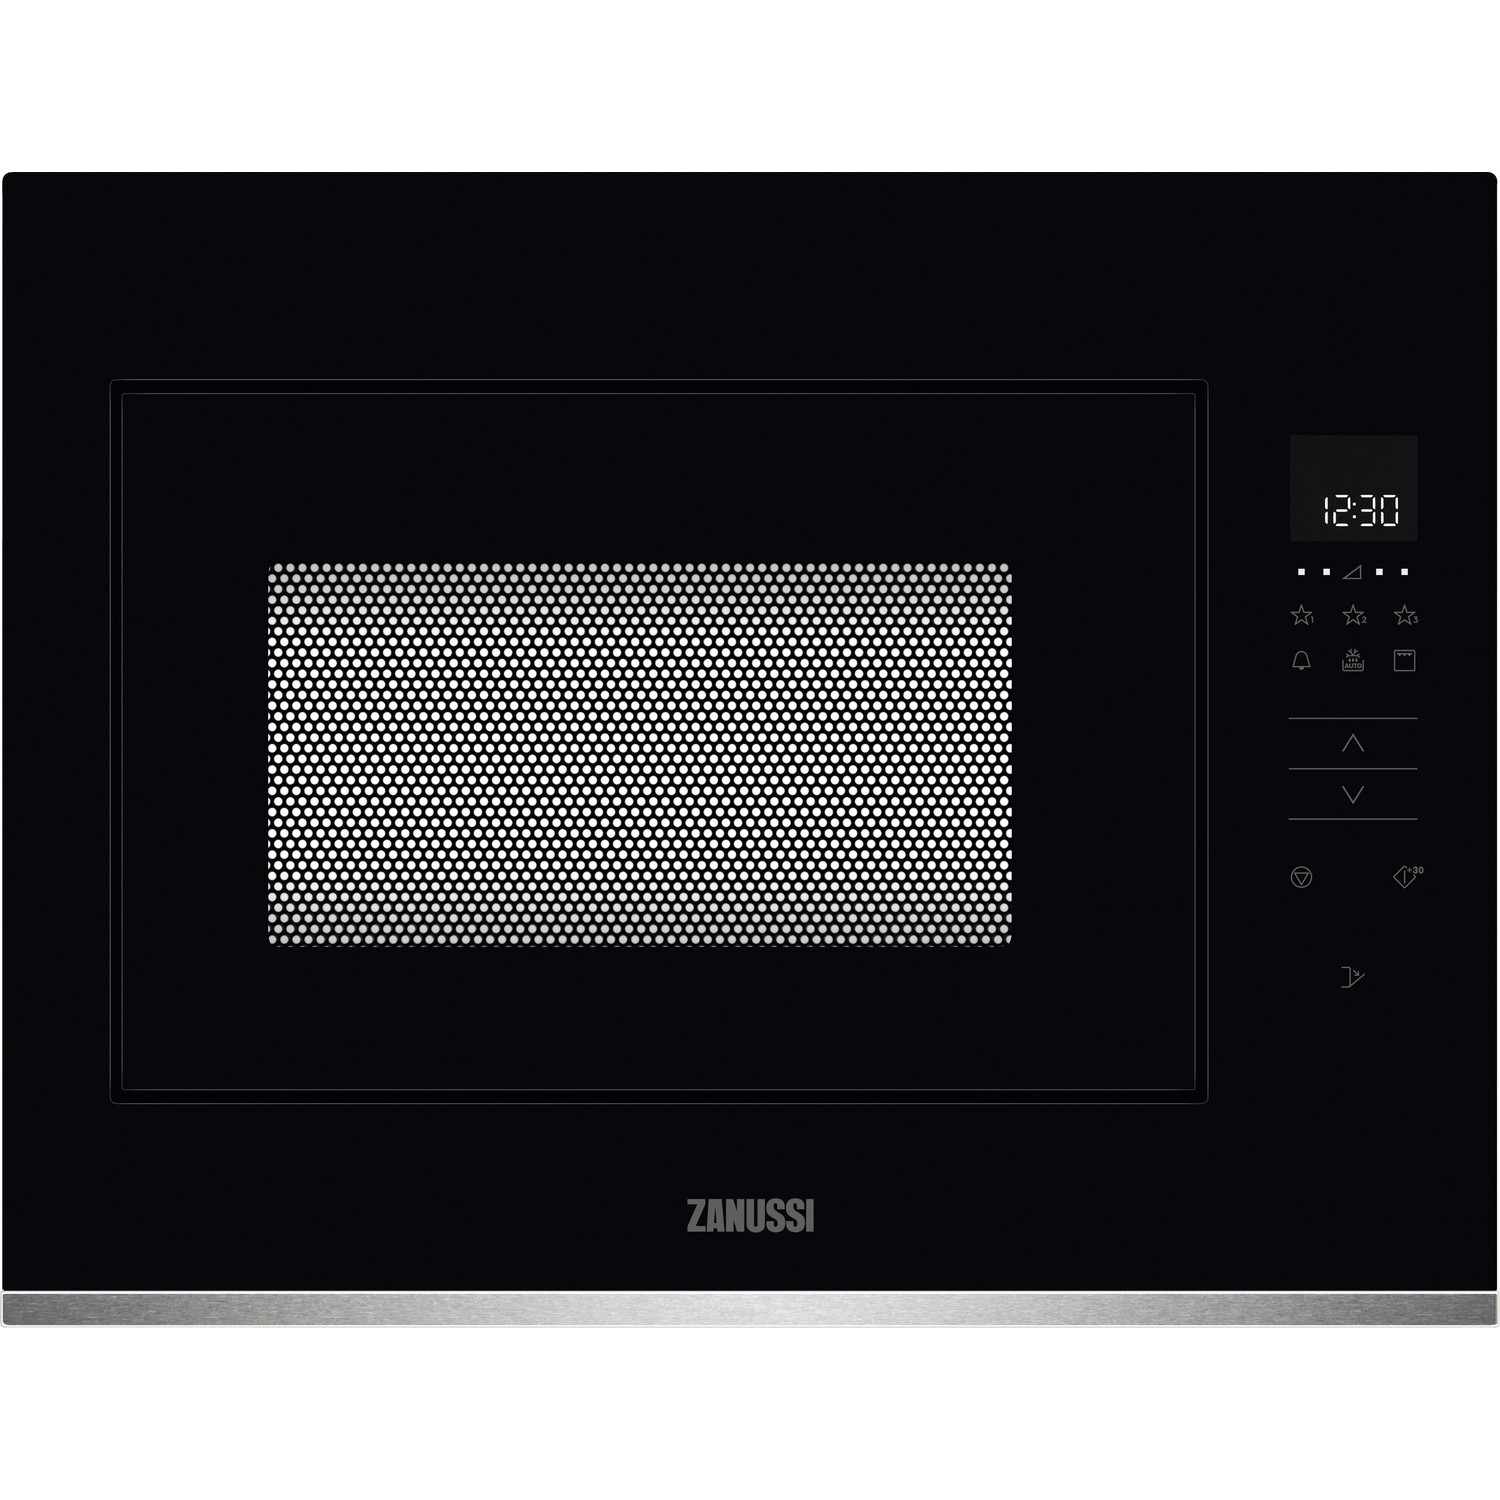 Refurbished Zanussi Series 20 ZMBN4DX Built In 25L with Grill 900W Microwave Black